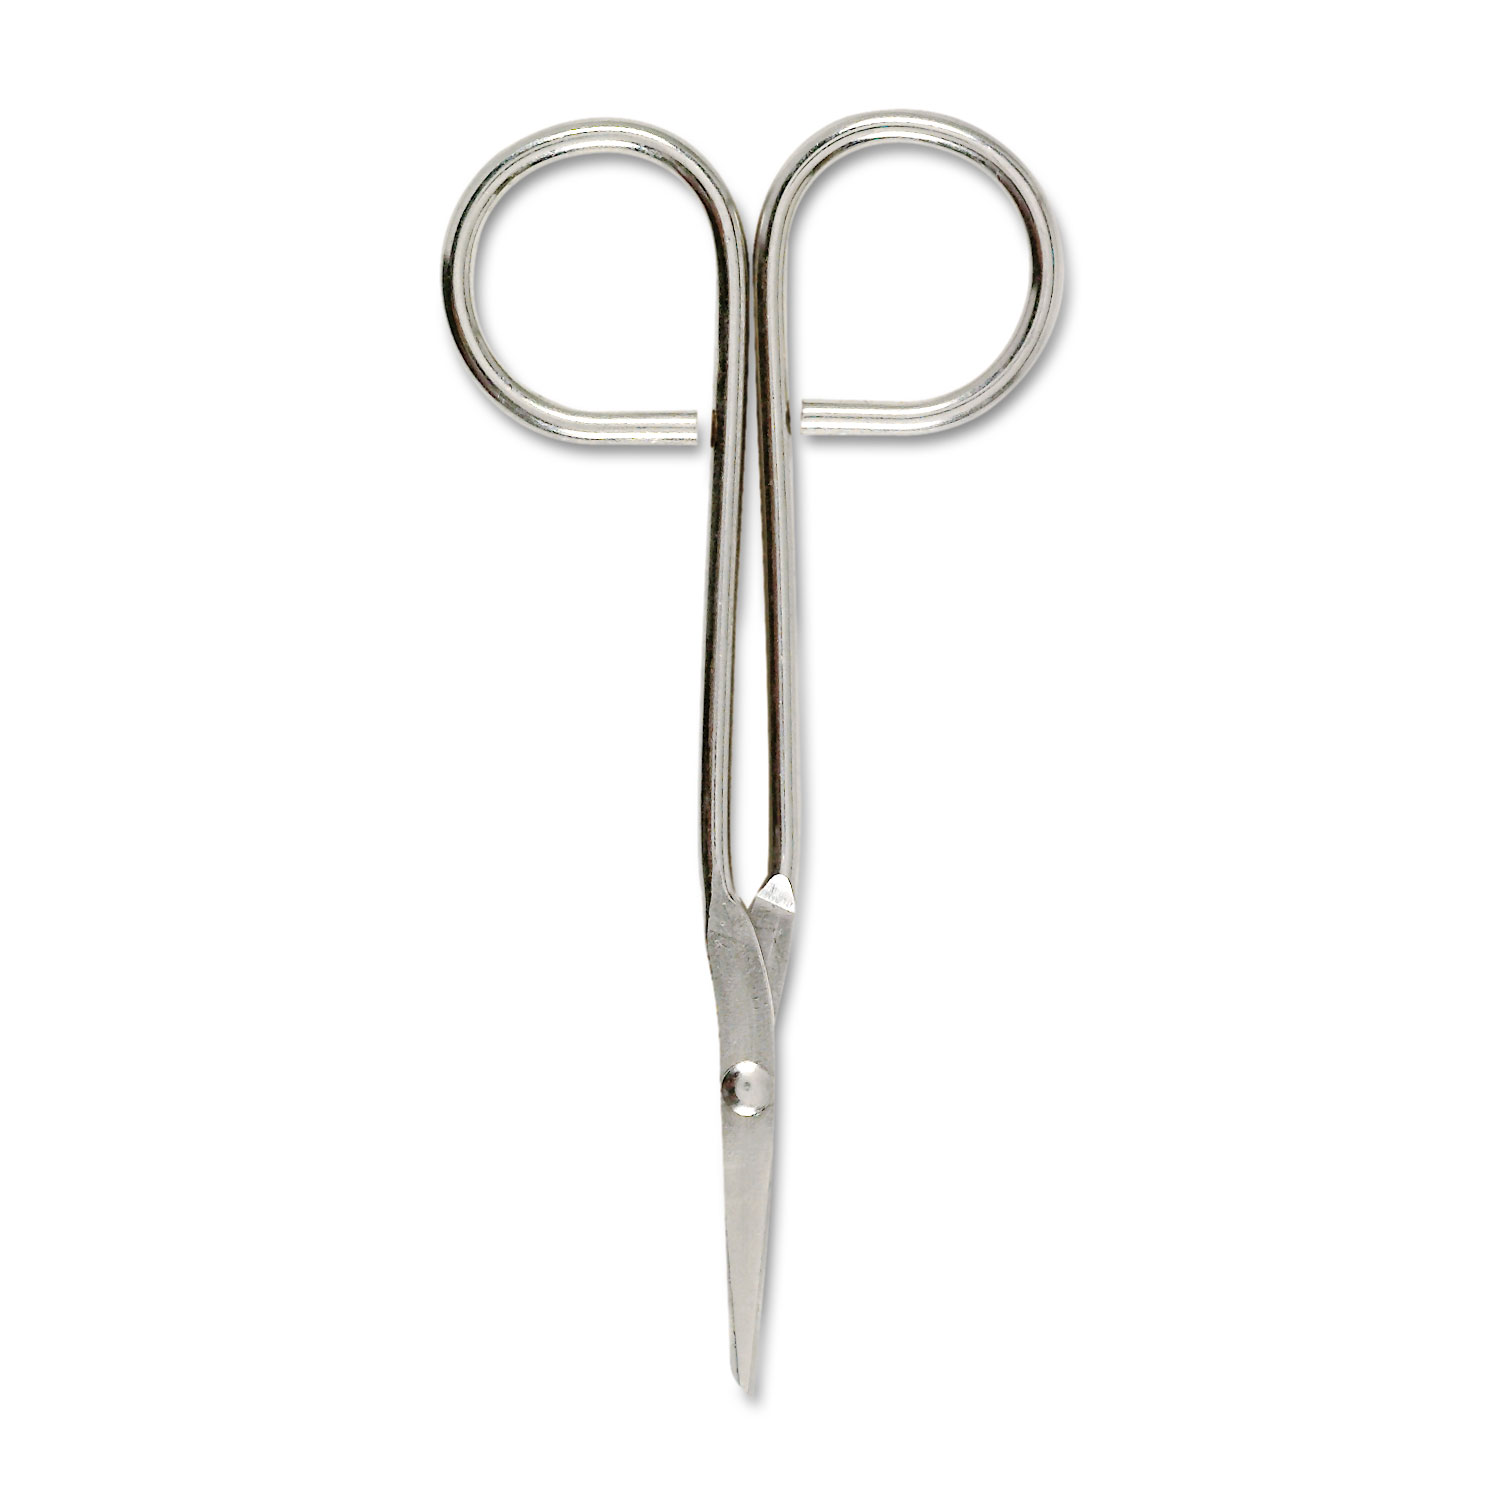 First-Aid Scissors, 4 1/2" Long, Nickel Plated